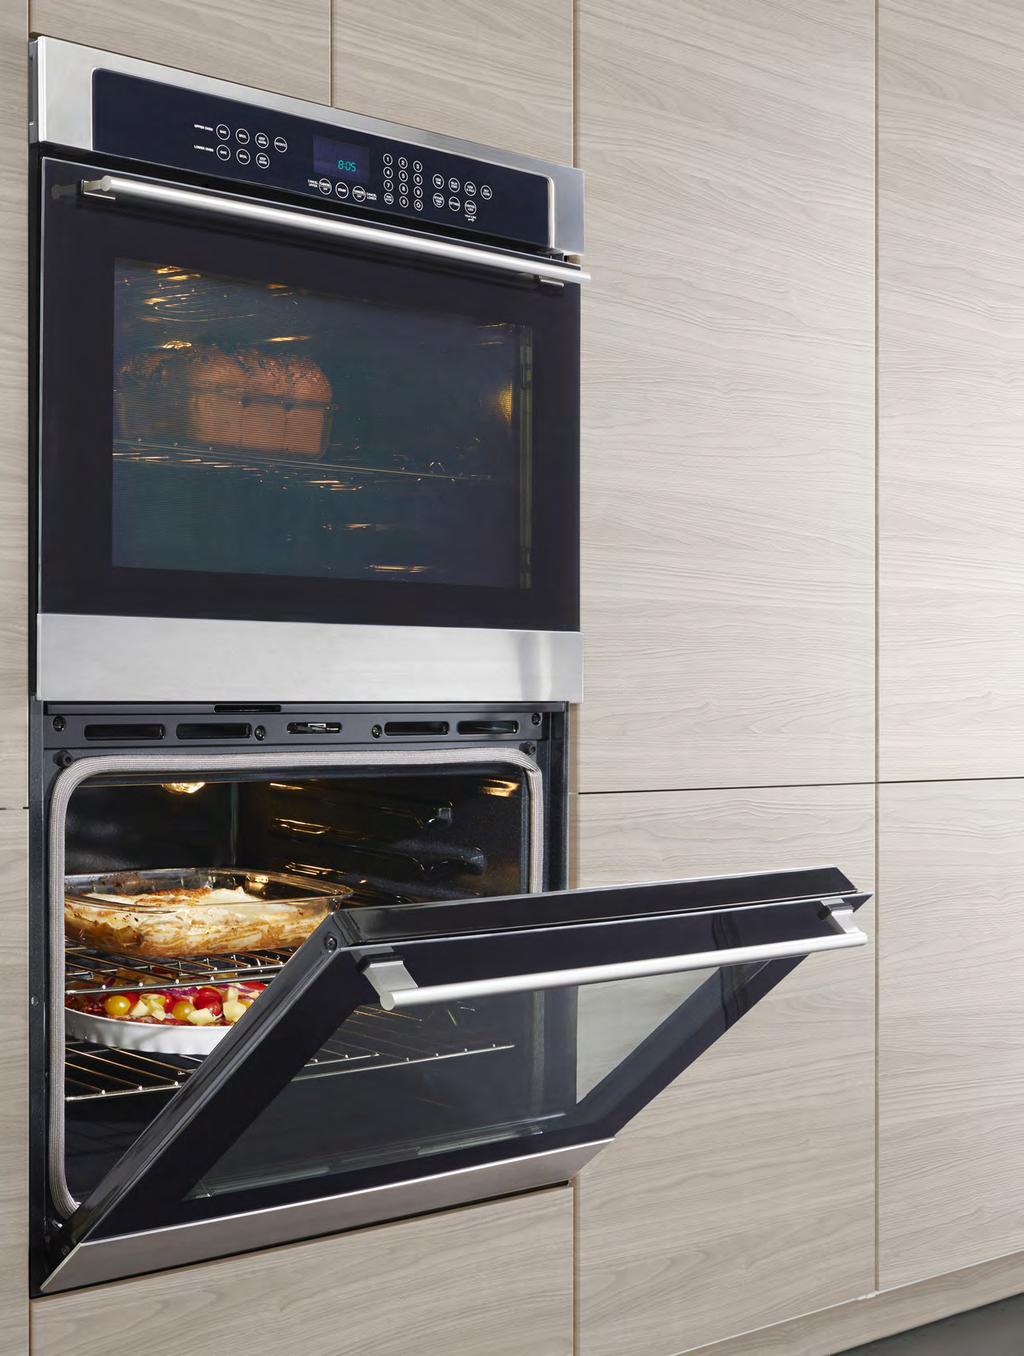 OVENS Our ovens are built-in fitting perfectly in both base and high kitchen cabinets.